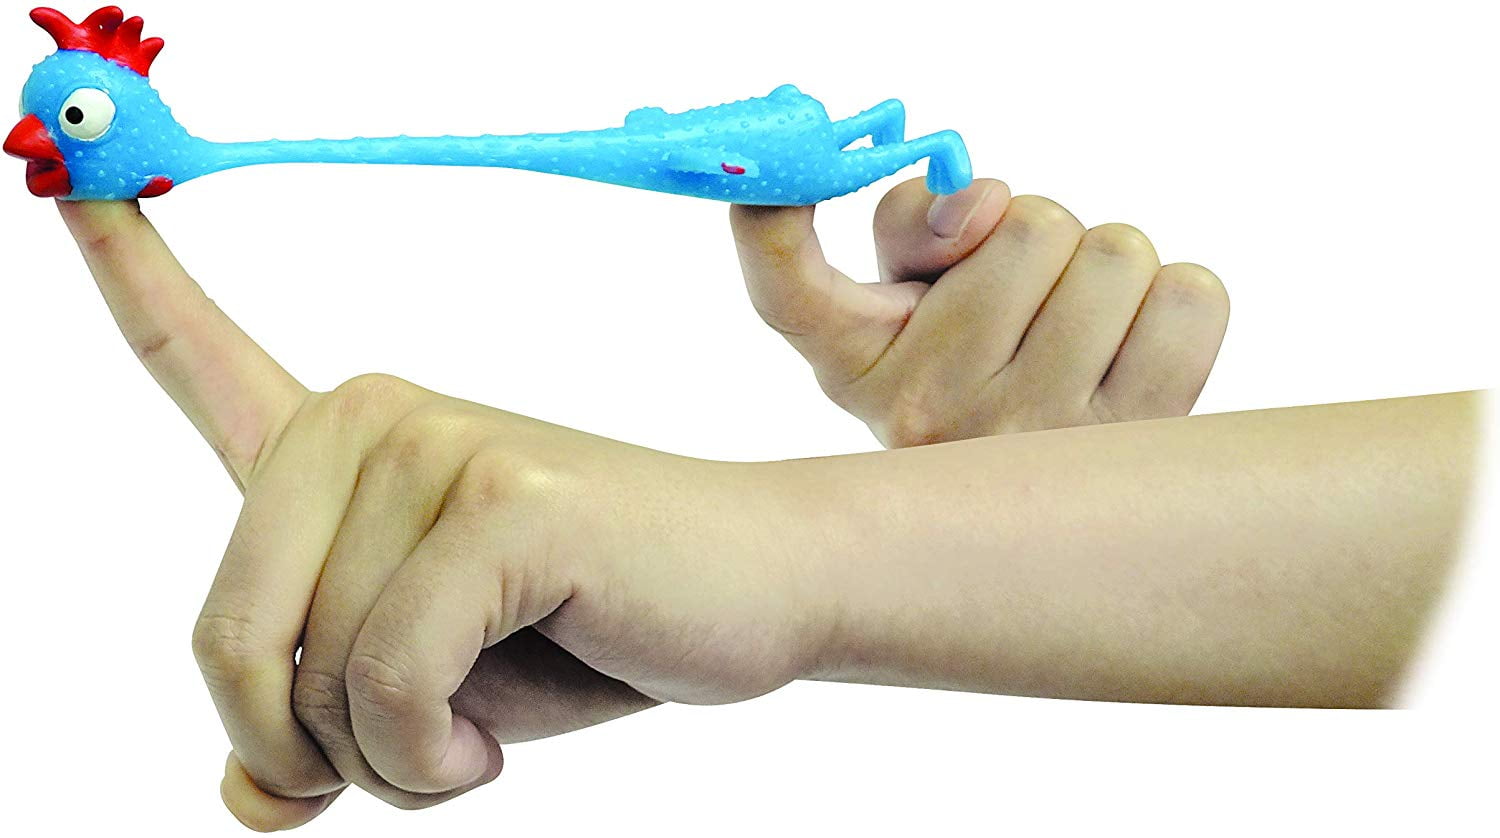 Details about   Funny Children Squeeze Toy Finger Slingshot Launch Game G5H3 Pinball For V8N4 